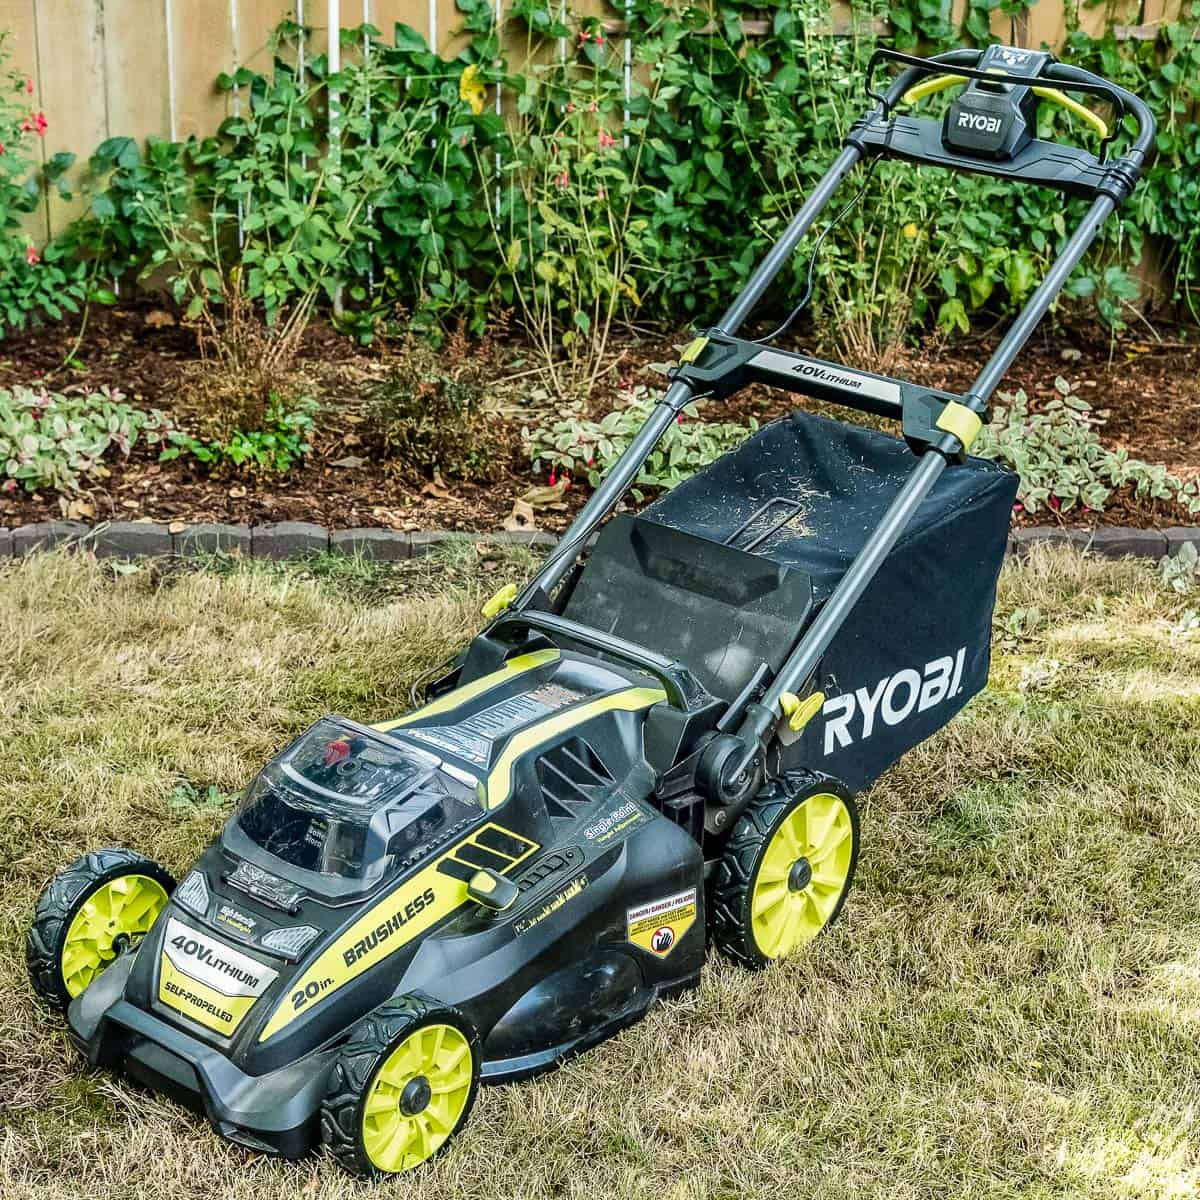 Ryobi Self Propelled Electric Lawn Mower Review - The Handyman's Daughter